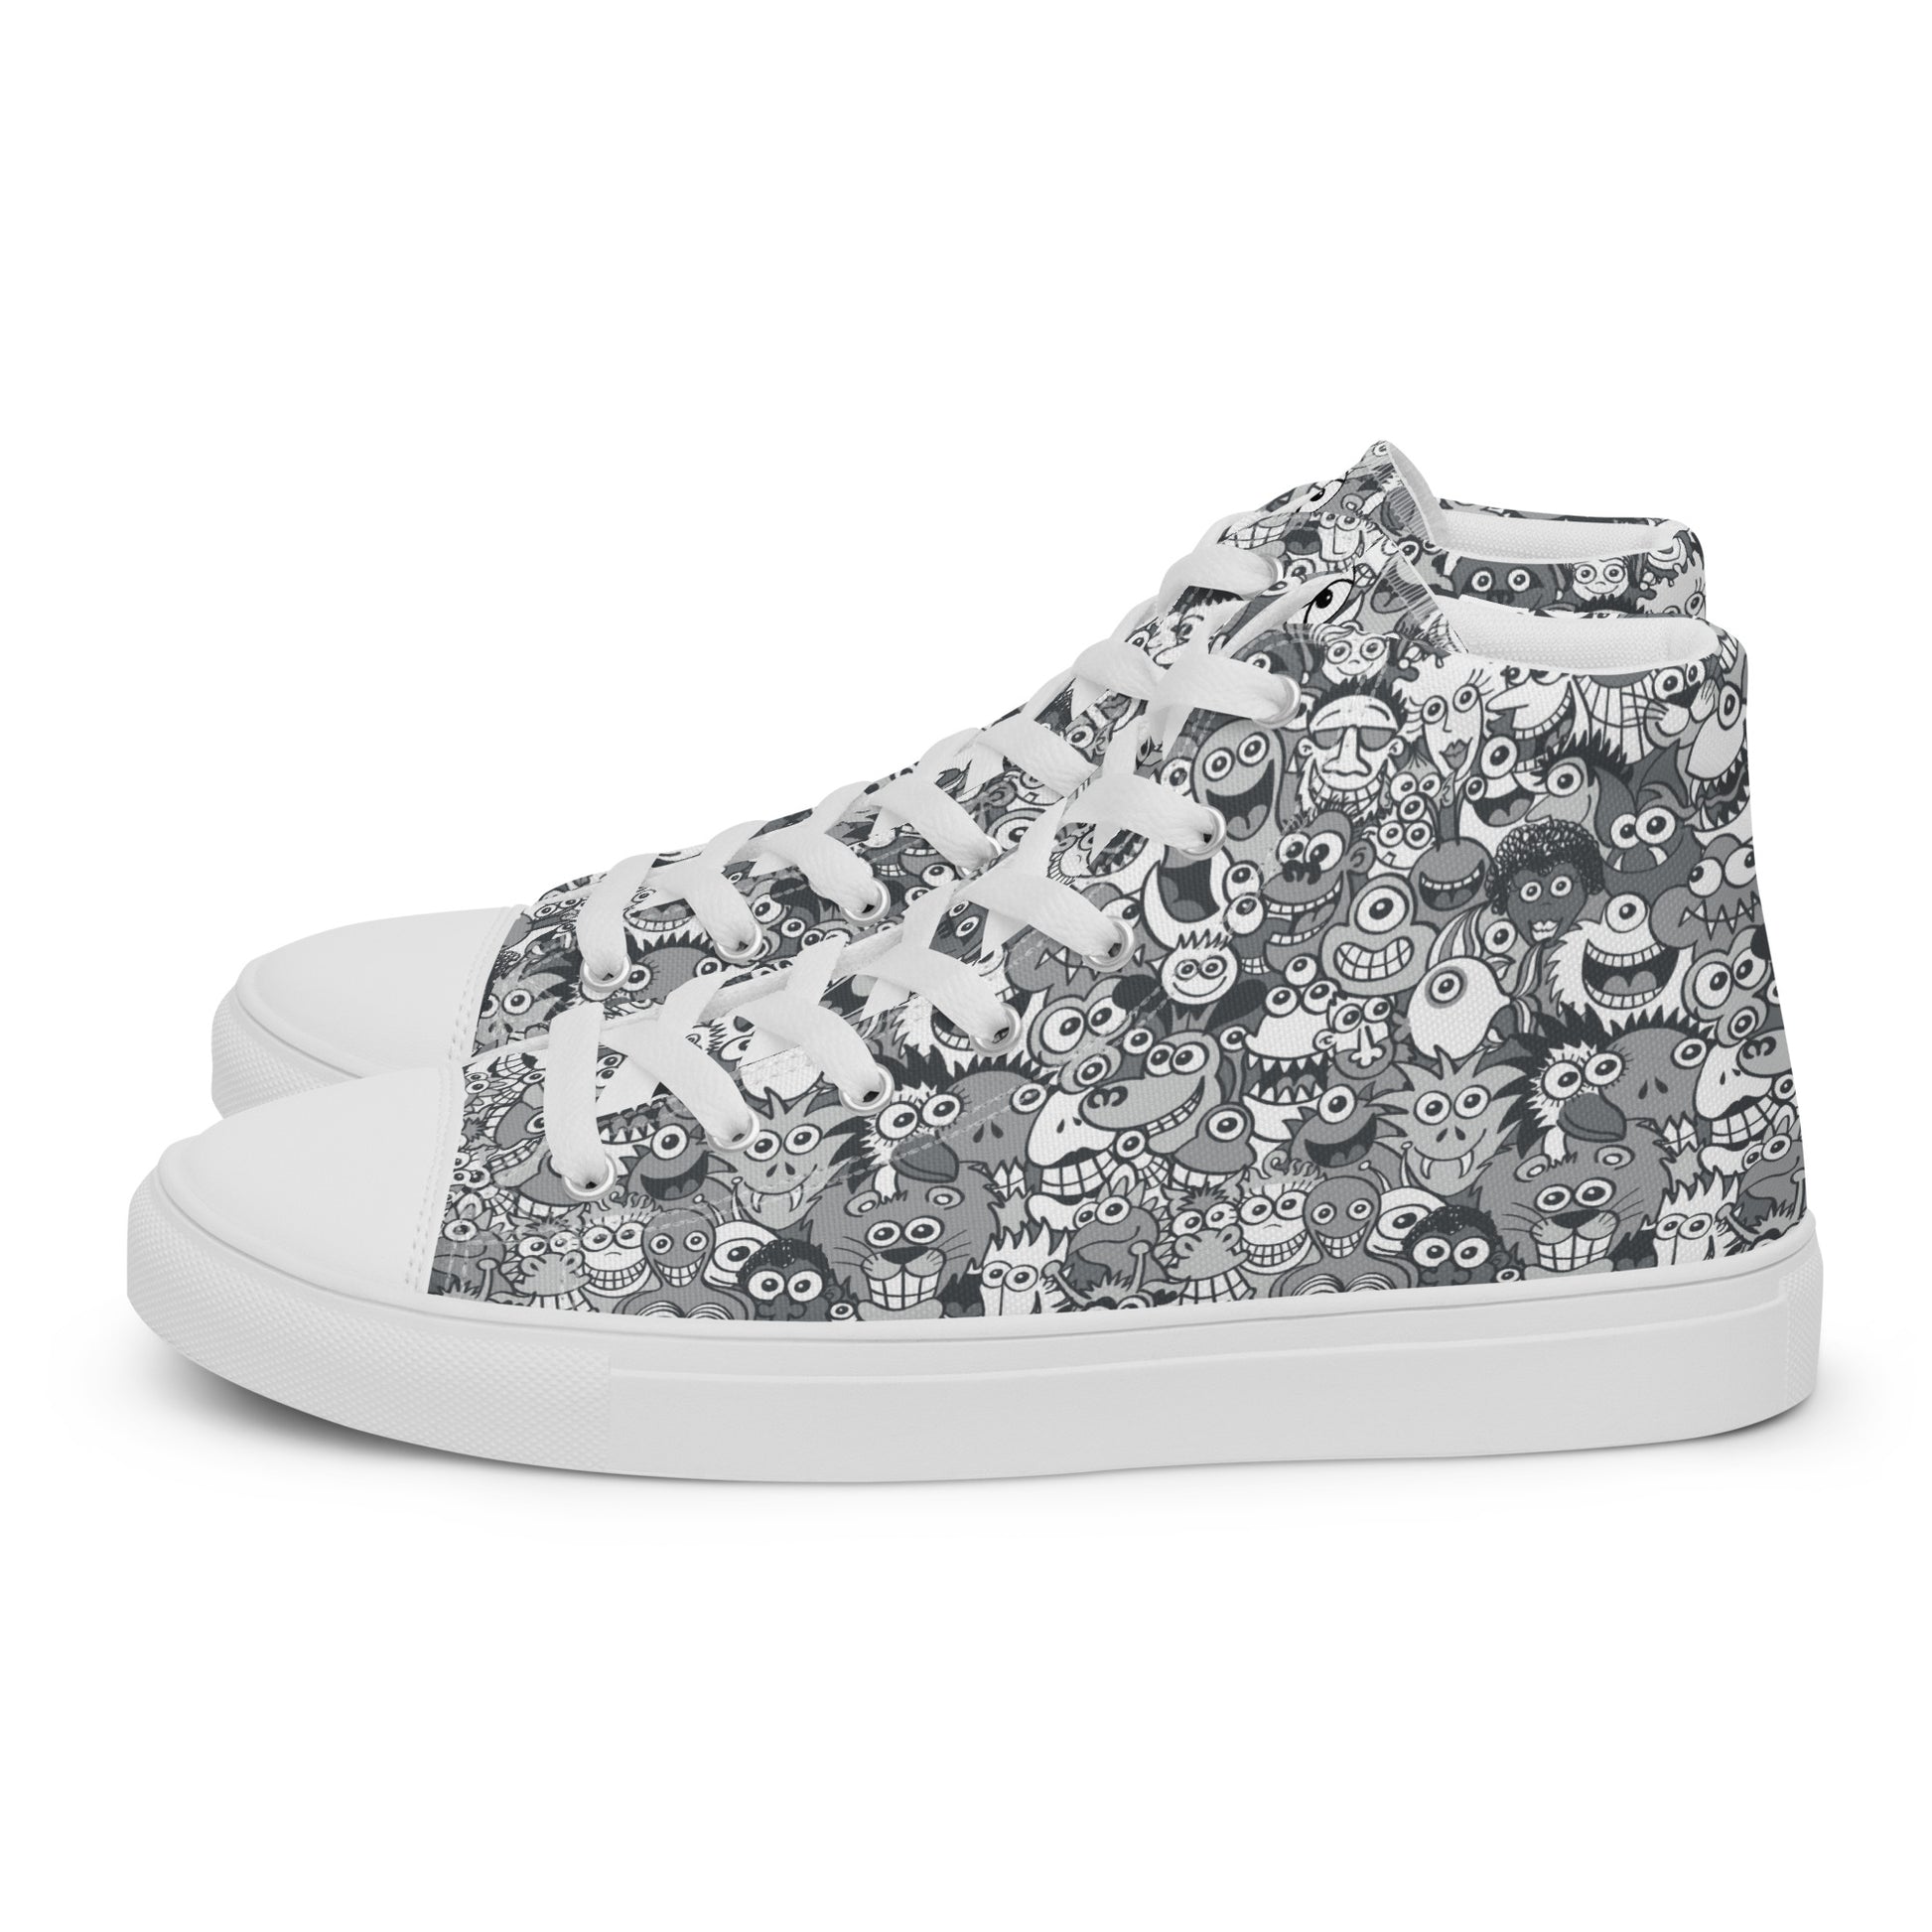 Find the gray man in the gray crowd of this gray world Men’s high top canvas shoes. Side view